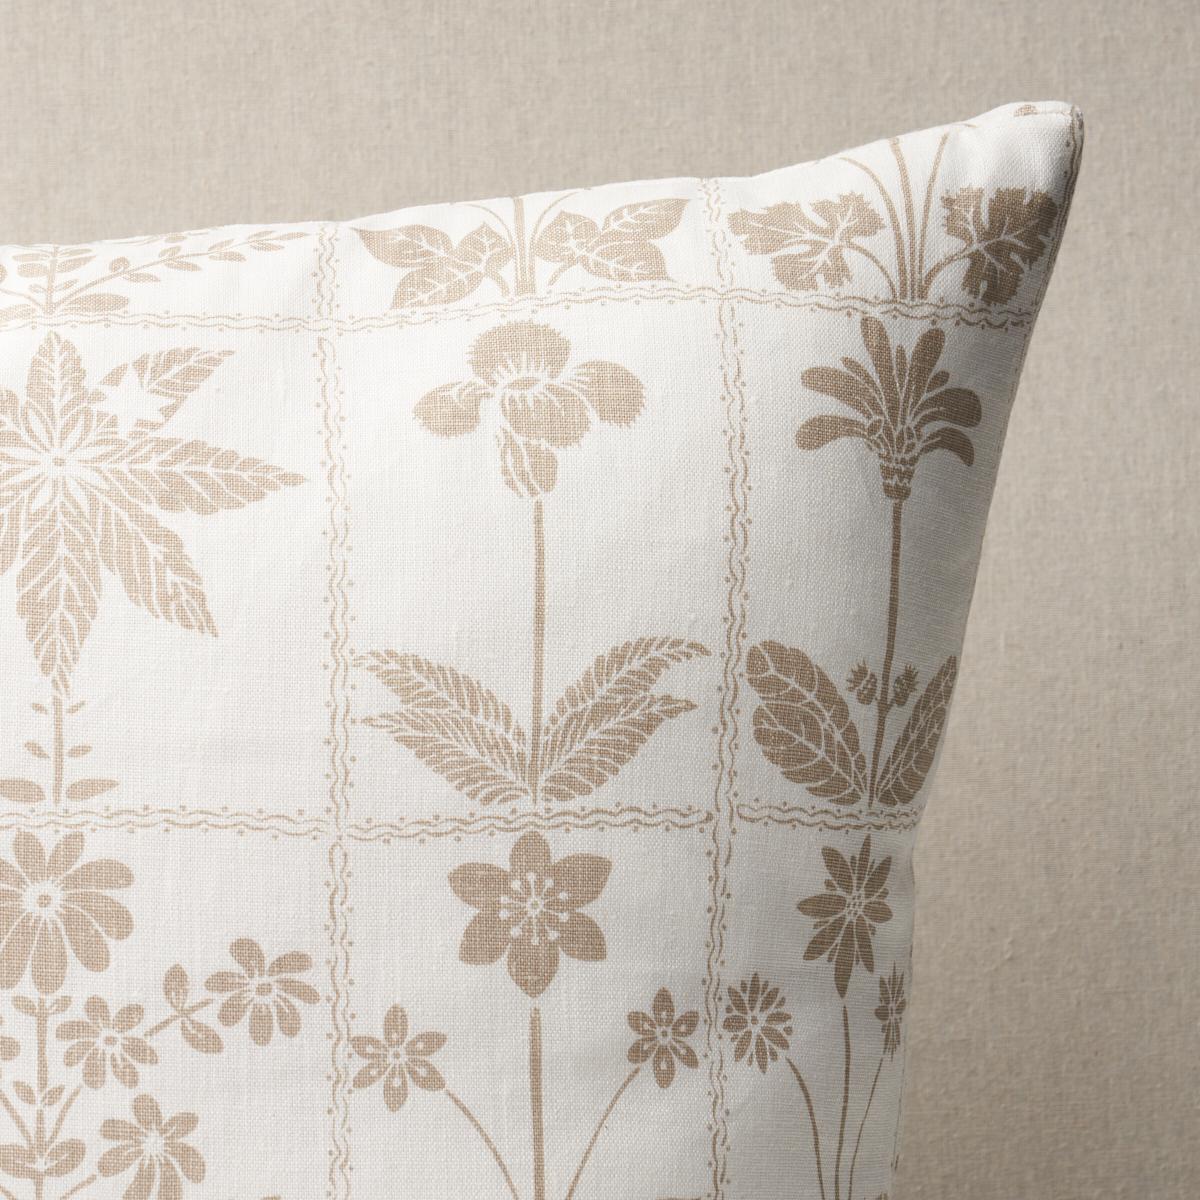 This pillow features Georgia Wildflowers with a knife edge finish. Inspired by a midcentury pattern in our archive, Georgia Wildflowers in neutral is a stylized silhouette design printed on cotton-linen union cloth. This appealing mid-scale